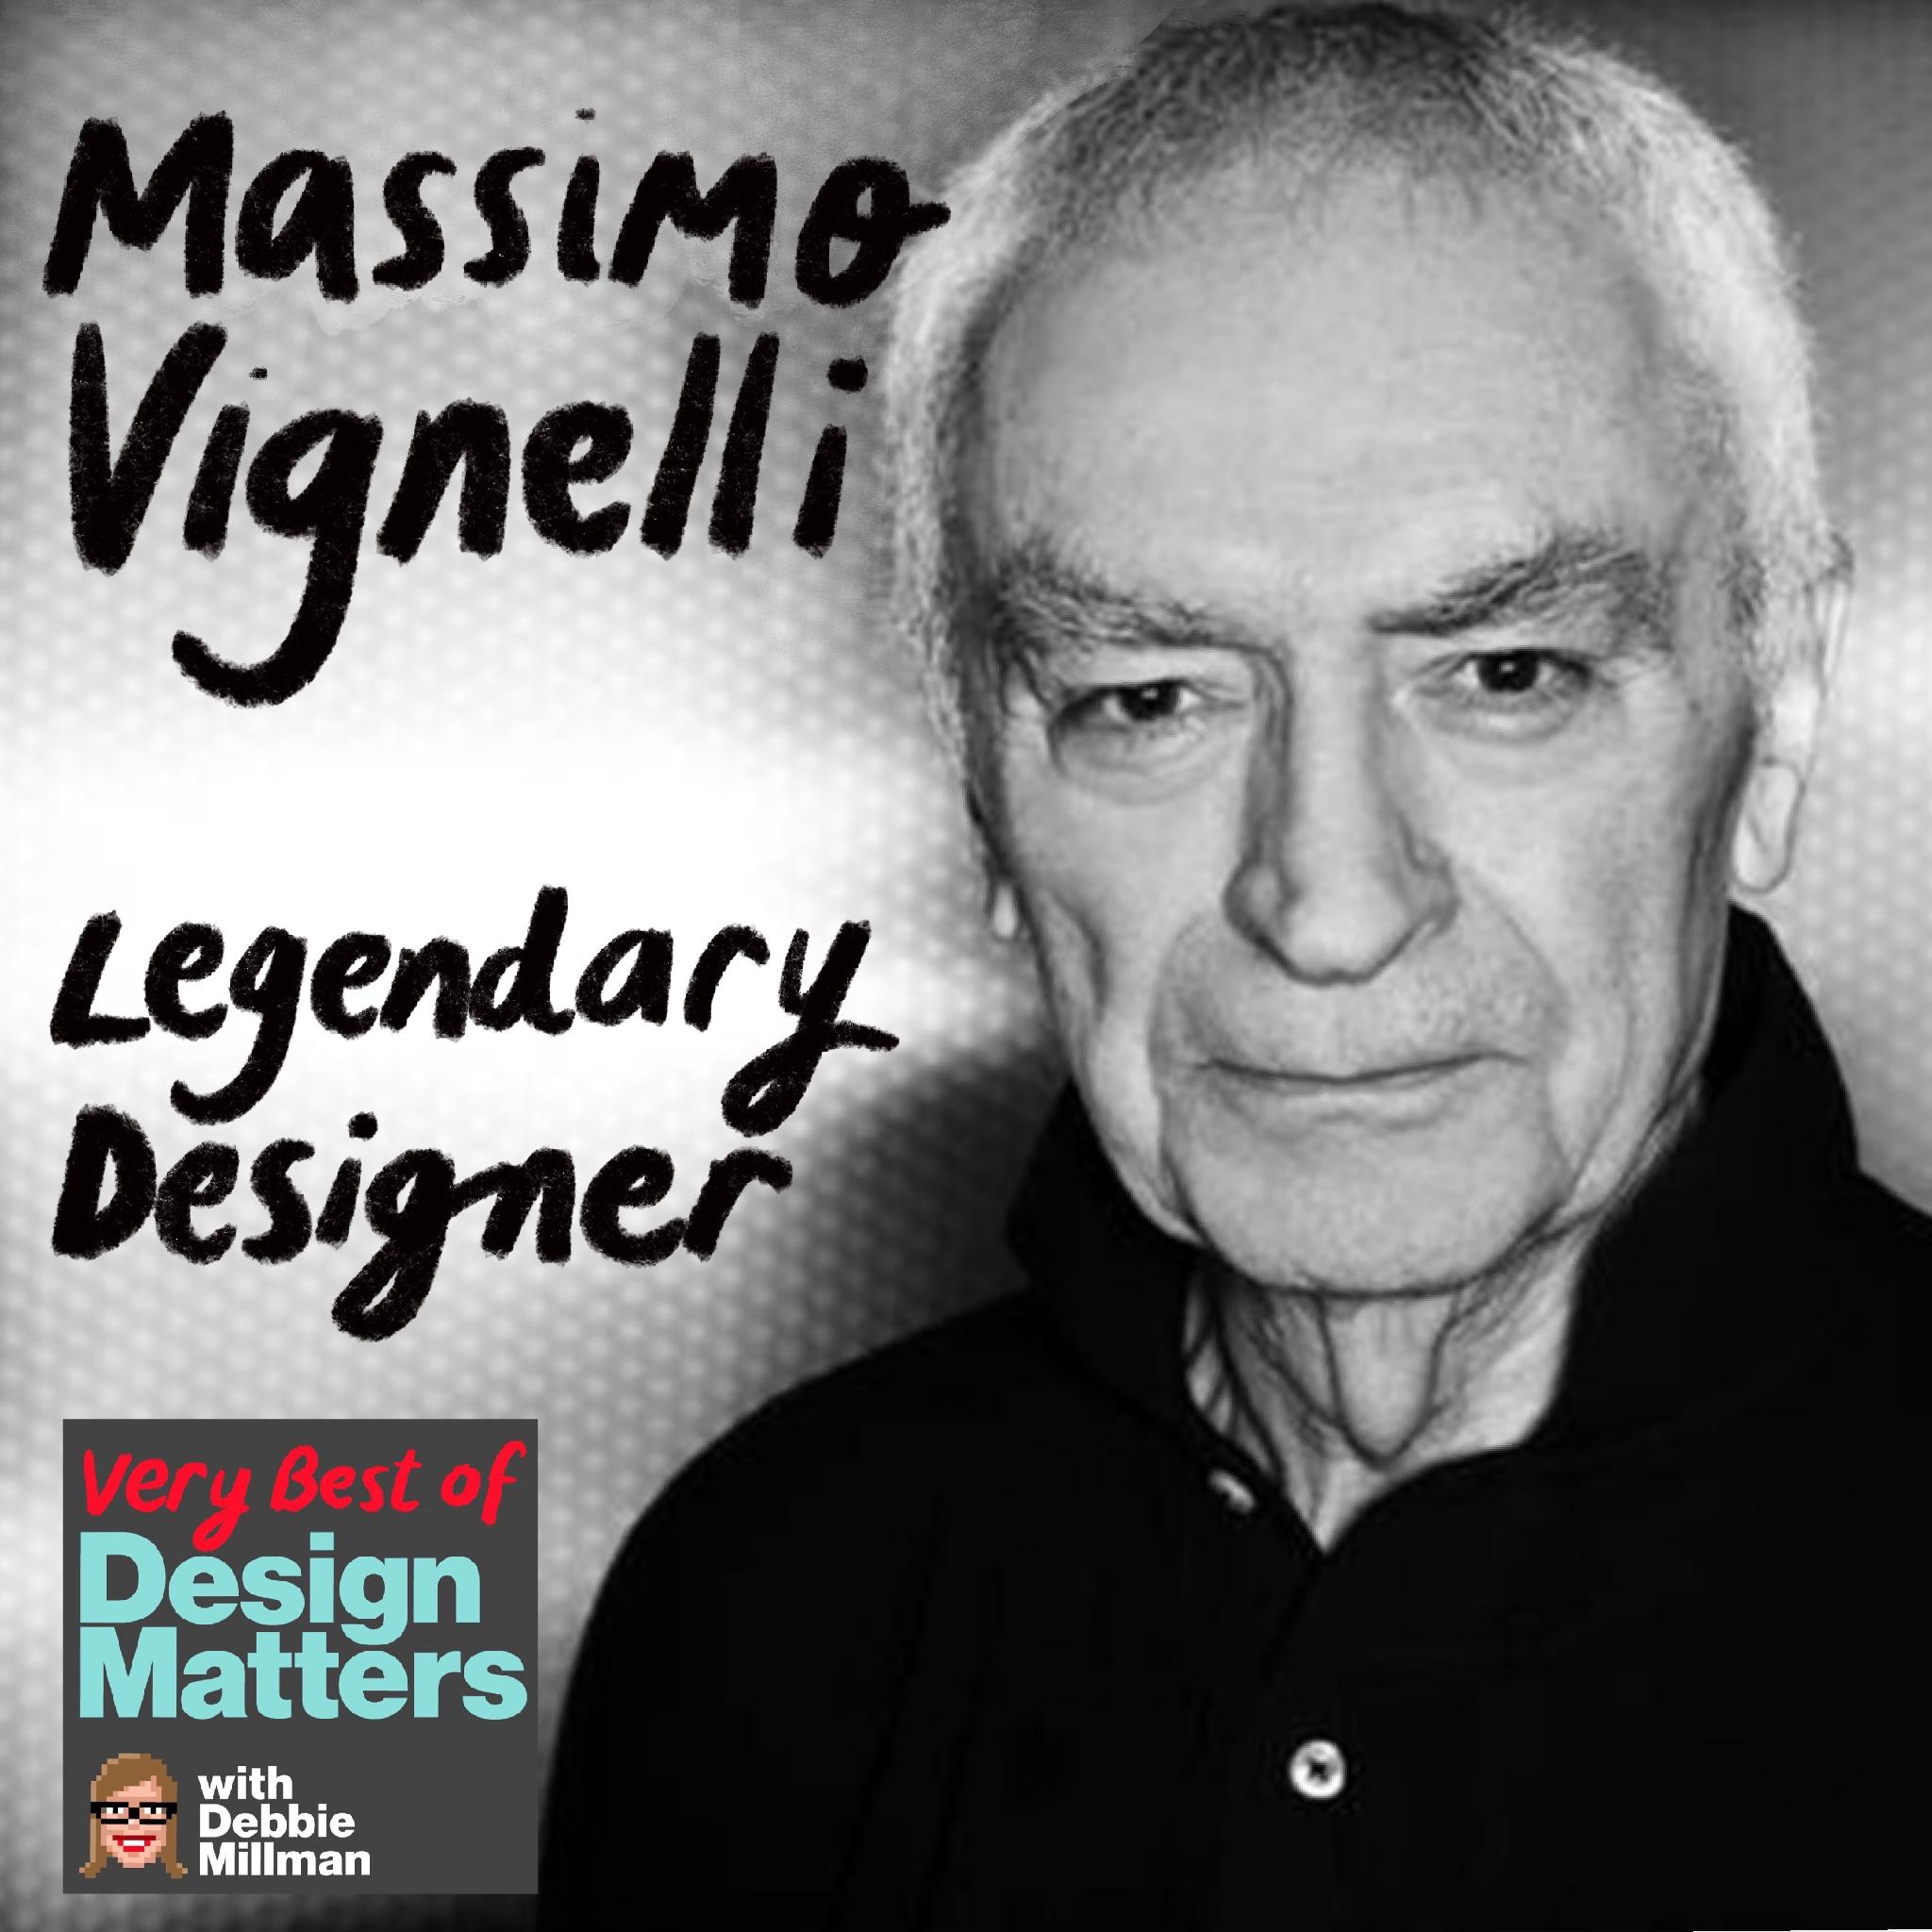 Thumbnail for "From the Archive: Massimo Vignelli".